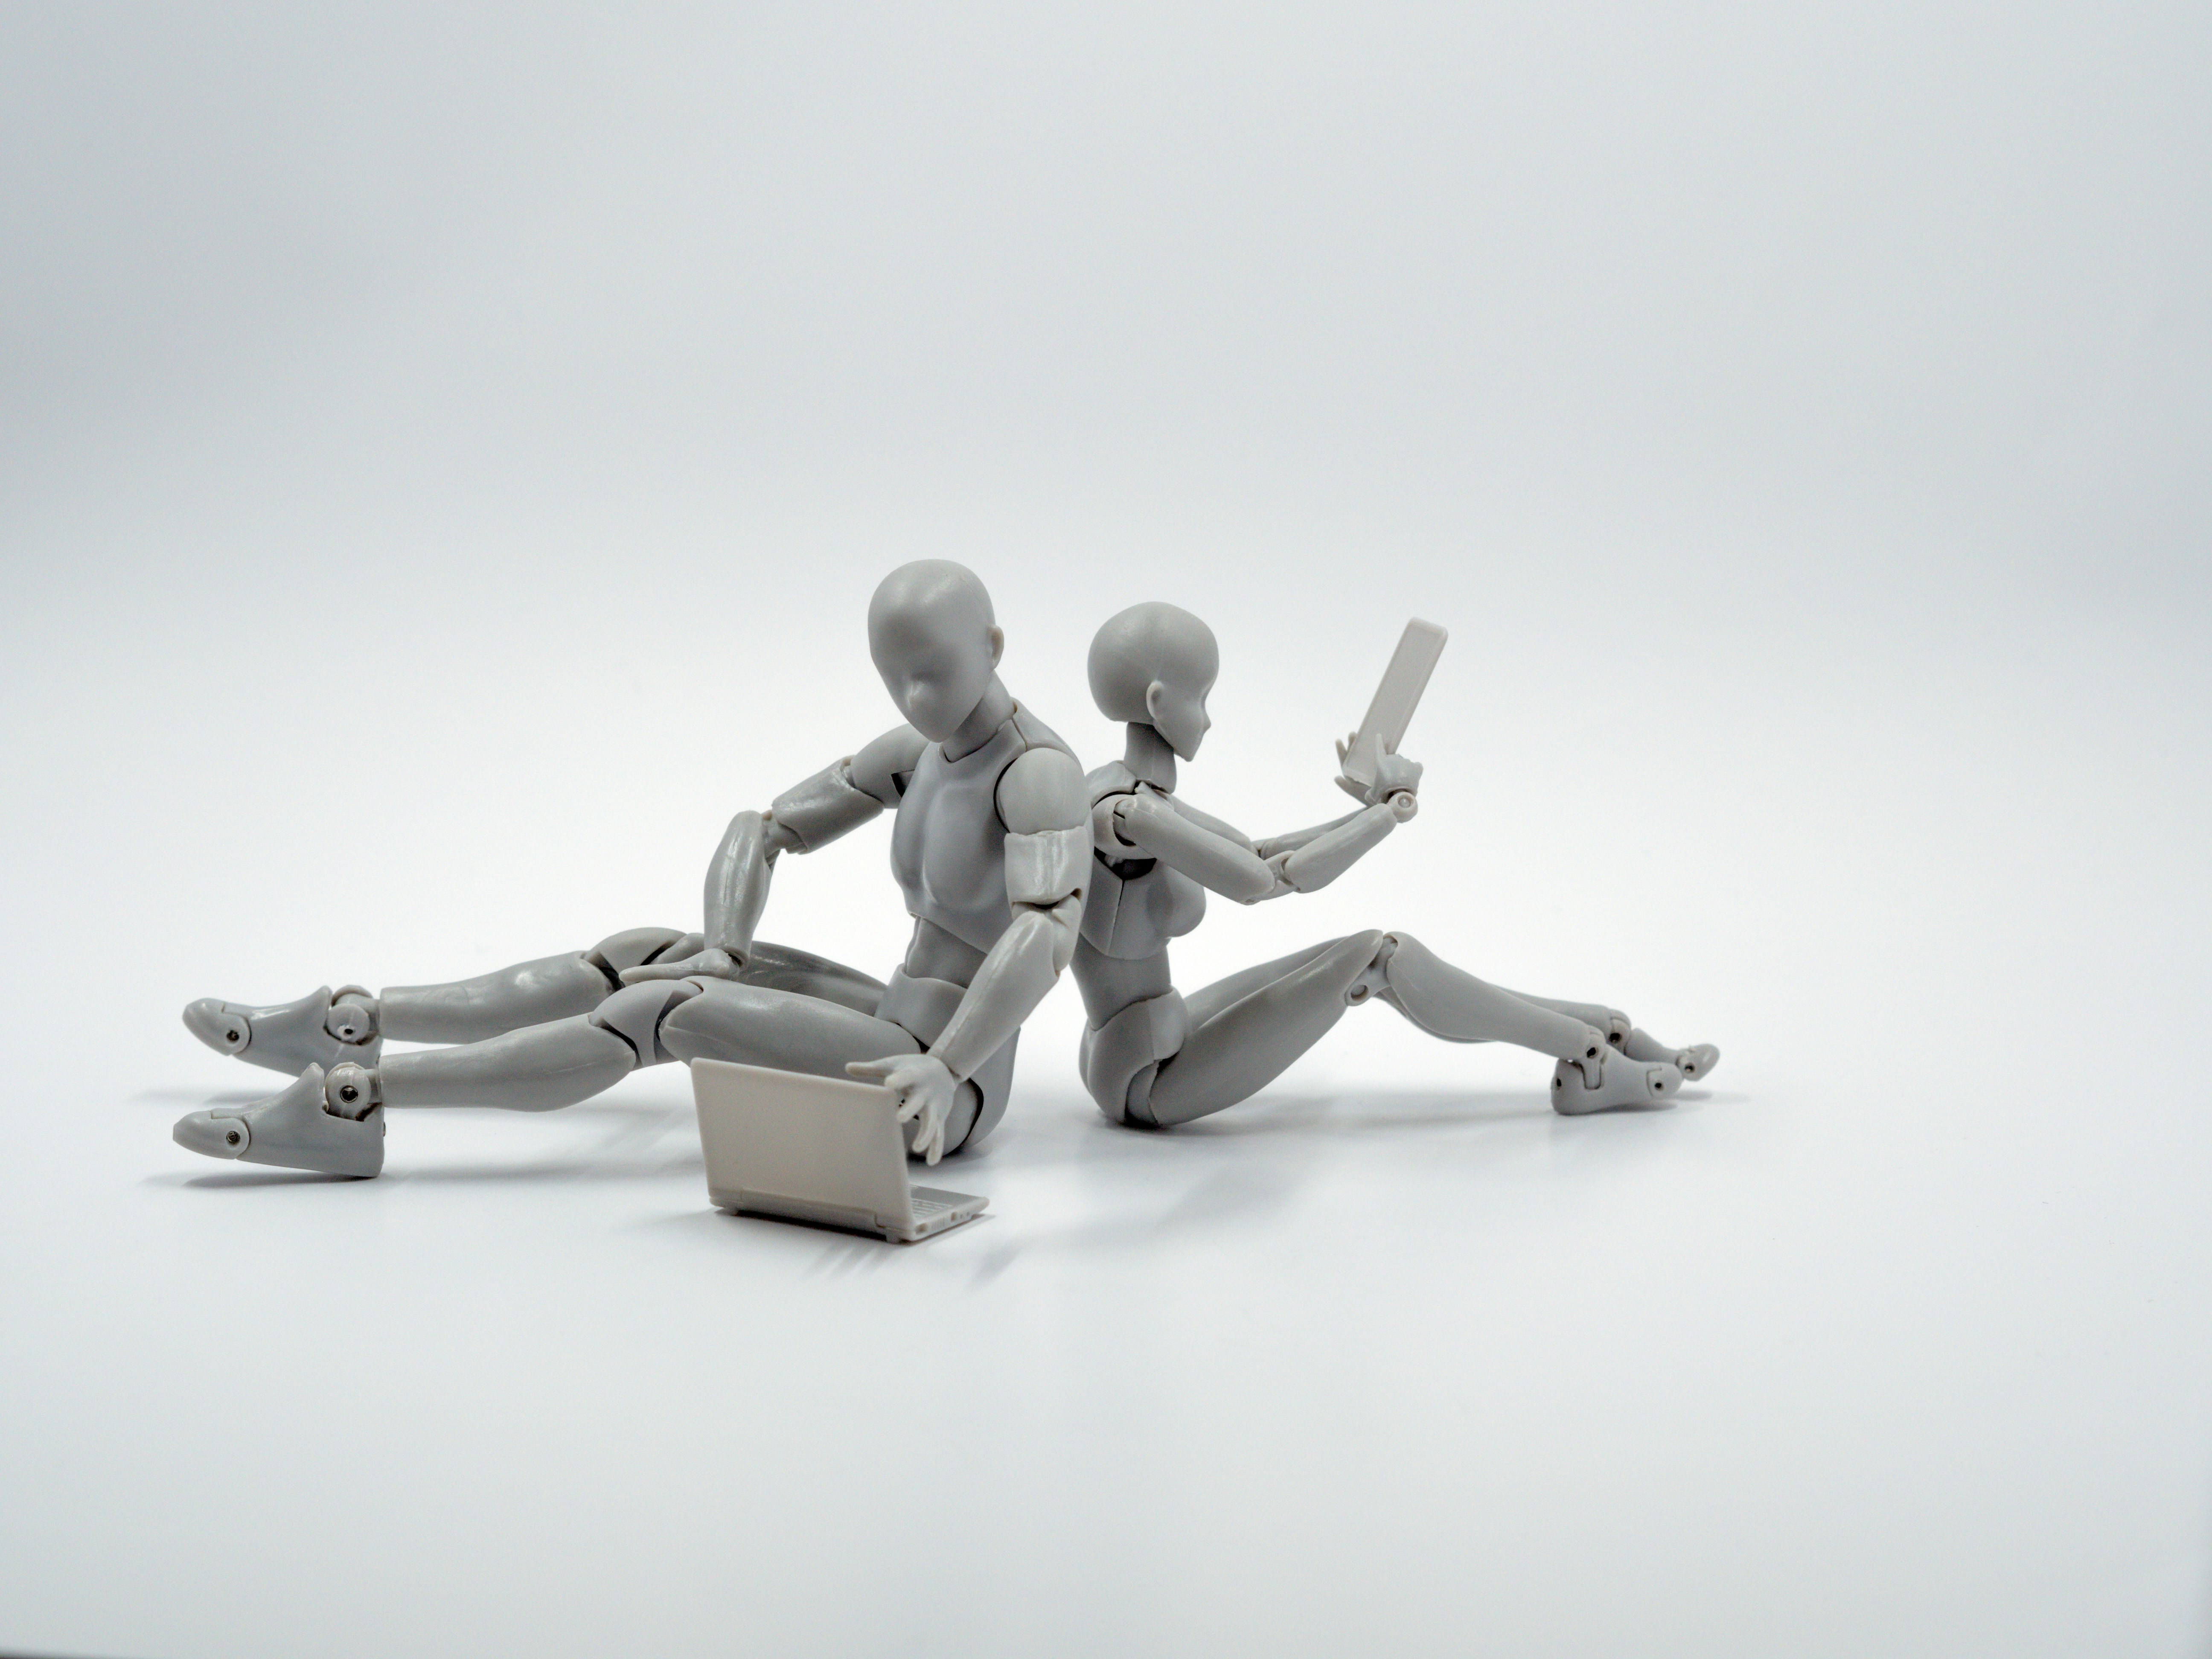 Two humanoid figures, possibly robots, sit on the ground, one holding a tablet and the other using a laptop